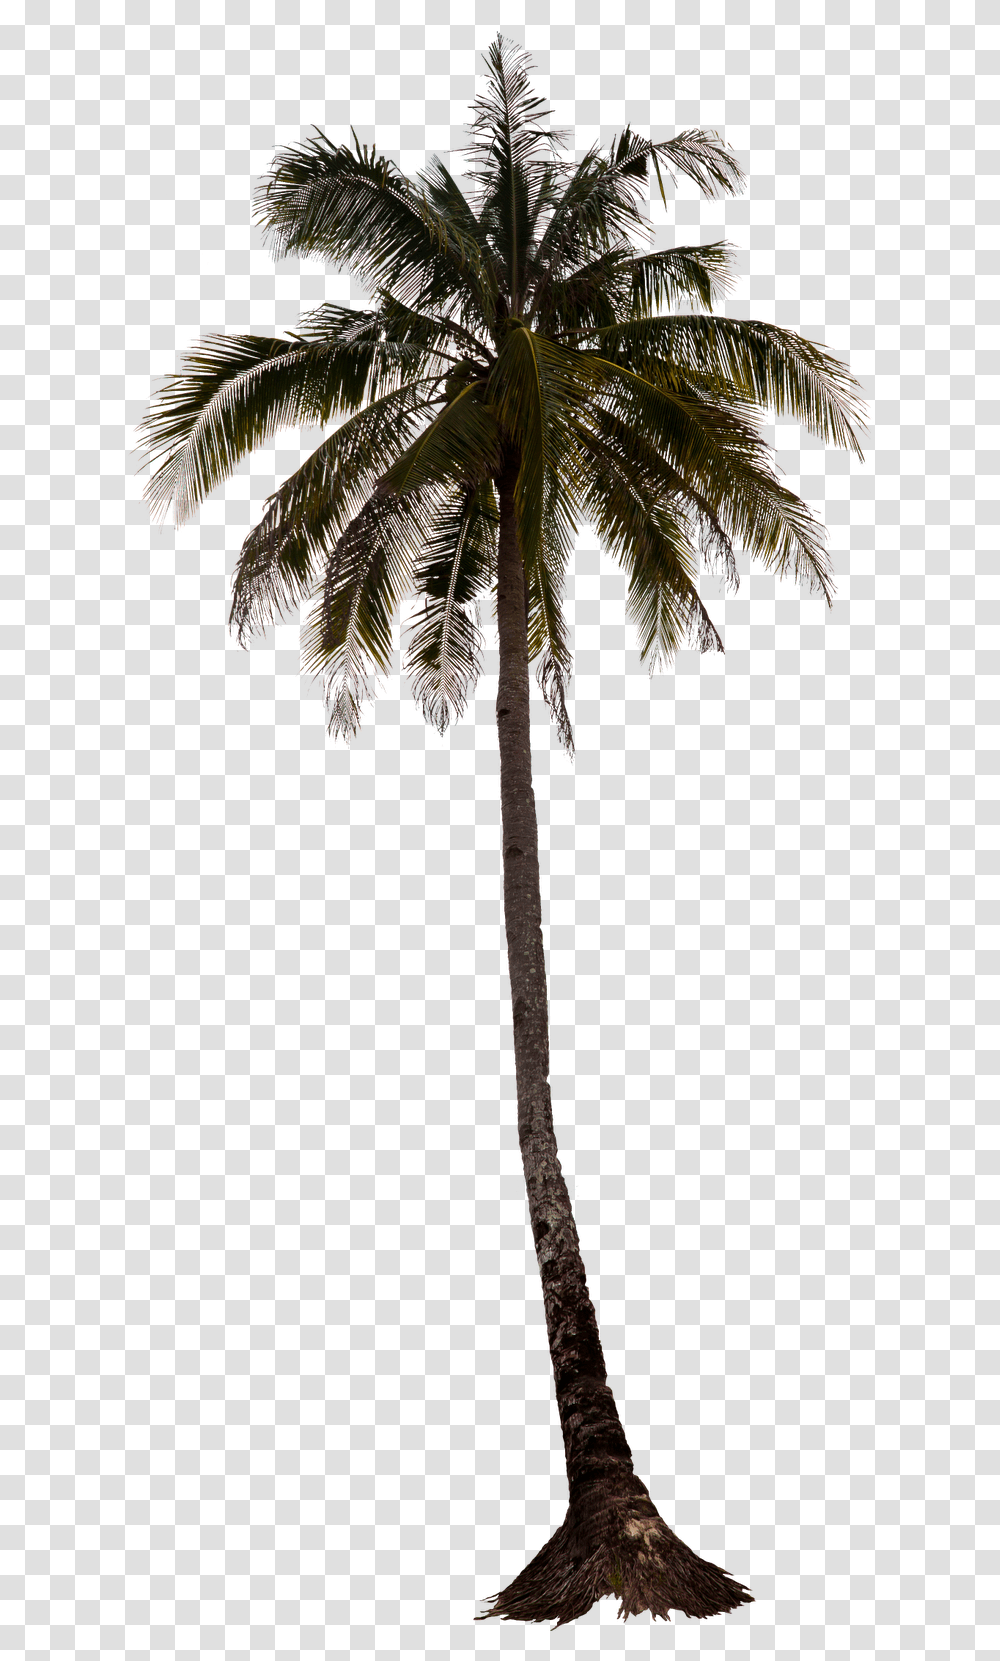 Download Hd Palm Tree Trees Render Palm Tree For Photoshop, Plant, Arecaceae, Leaf, Fir Transparent Png